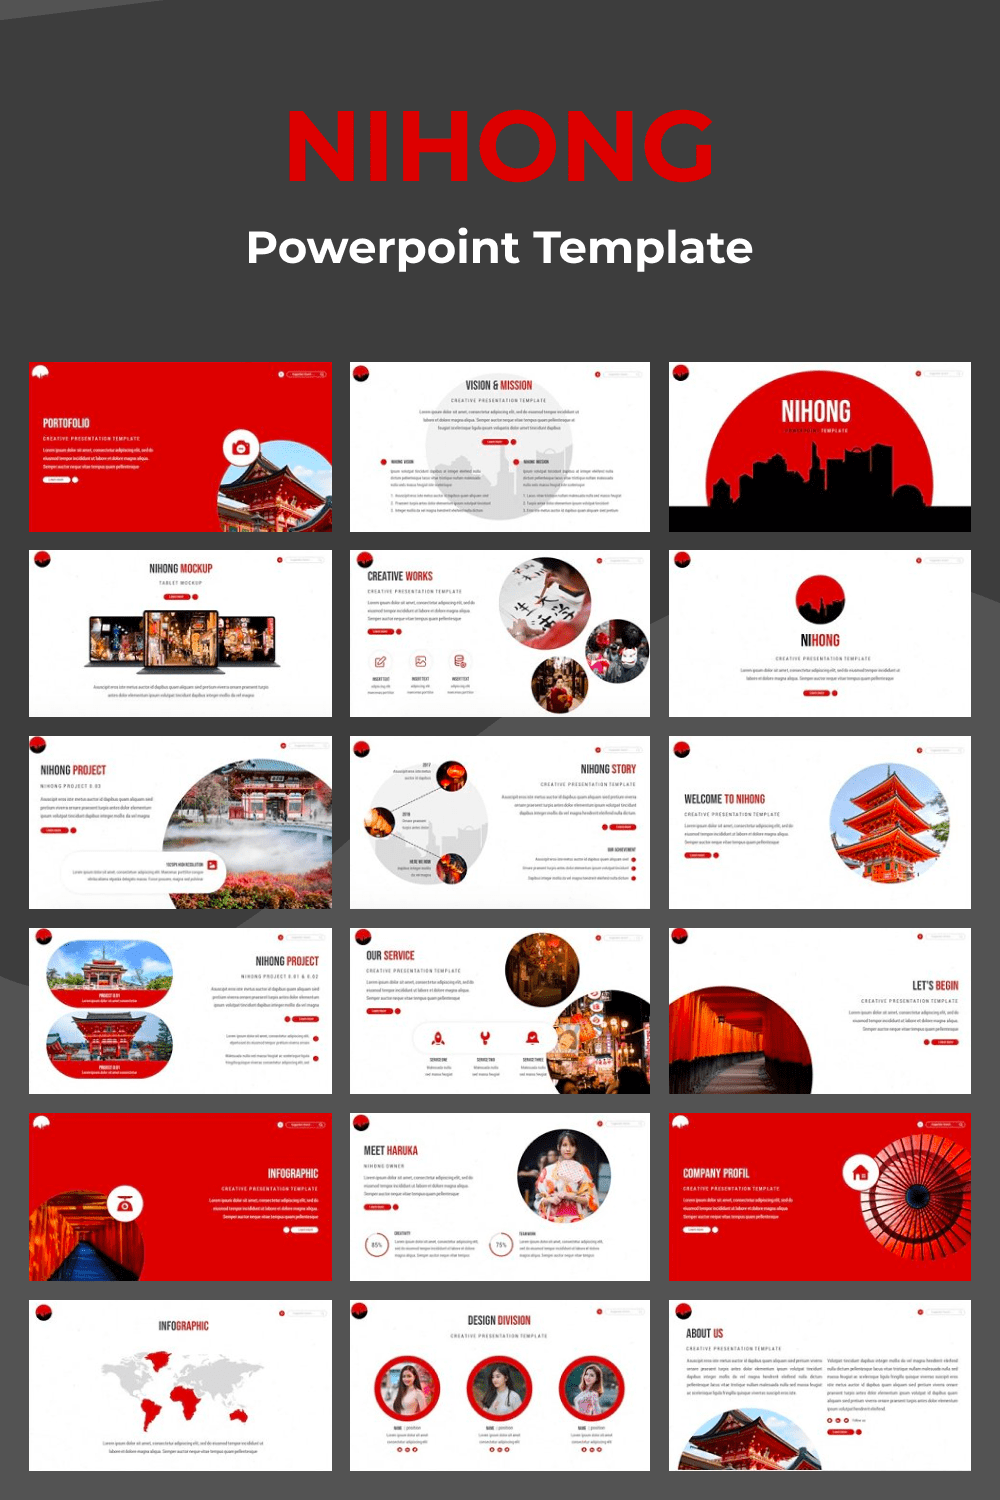 There are distinctive Japanese features here that make the template themed and unique.